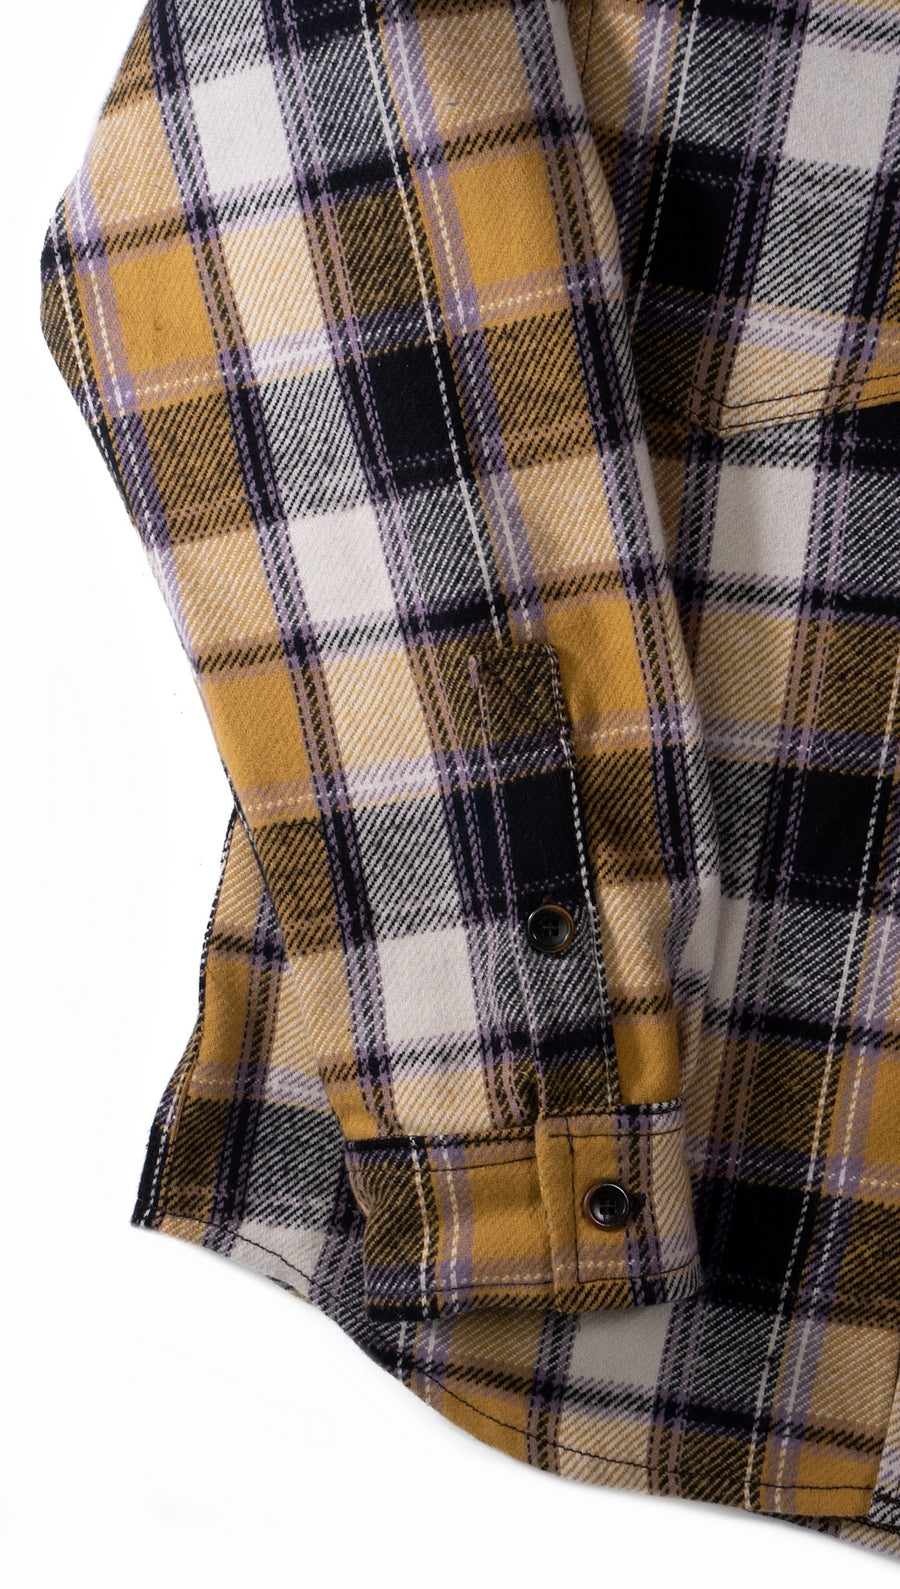 Cool Ruler JP Flannel by WILD